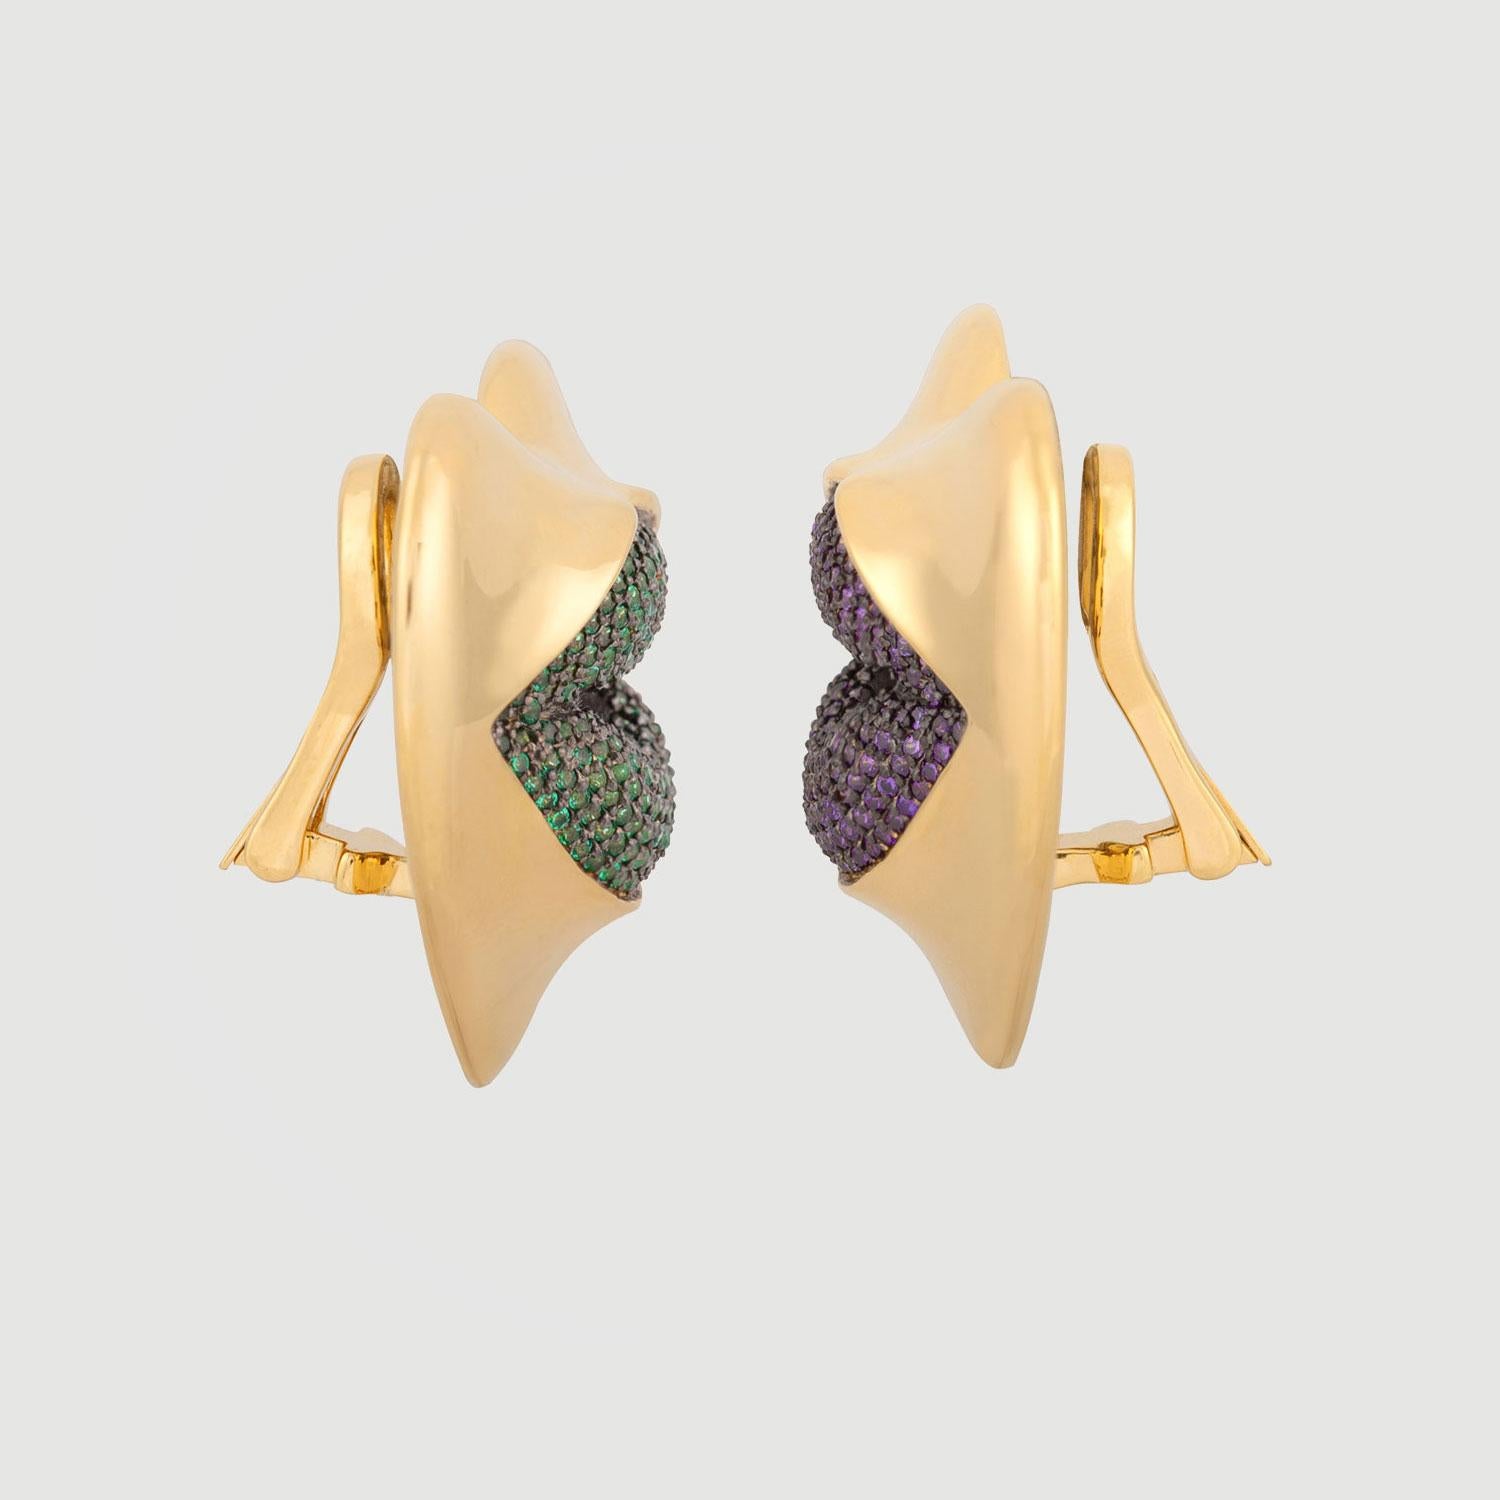 Love starts with the heart and lasts on the lips. These might be the sexiest earrings ever! Our sexy gold statement heart earrings with amethyst and peridot kisses. Shine your love on!

Composition: Sterling Silver, 18k gold vermeil and Rhodium